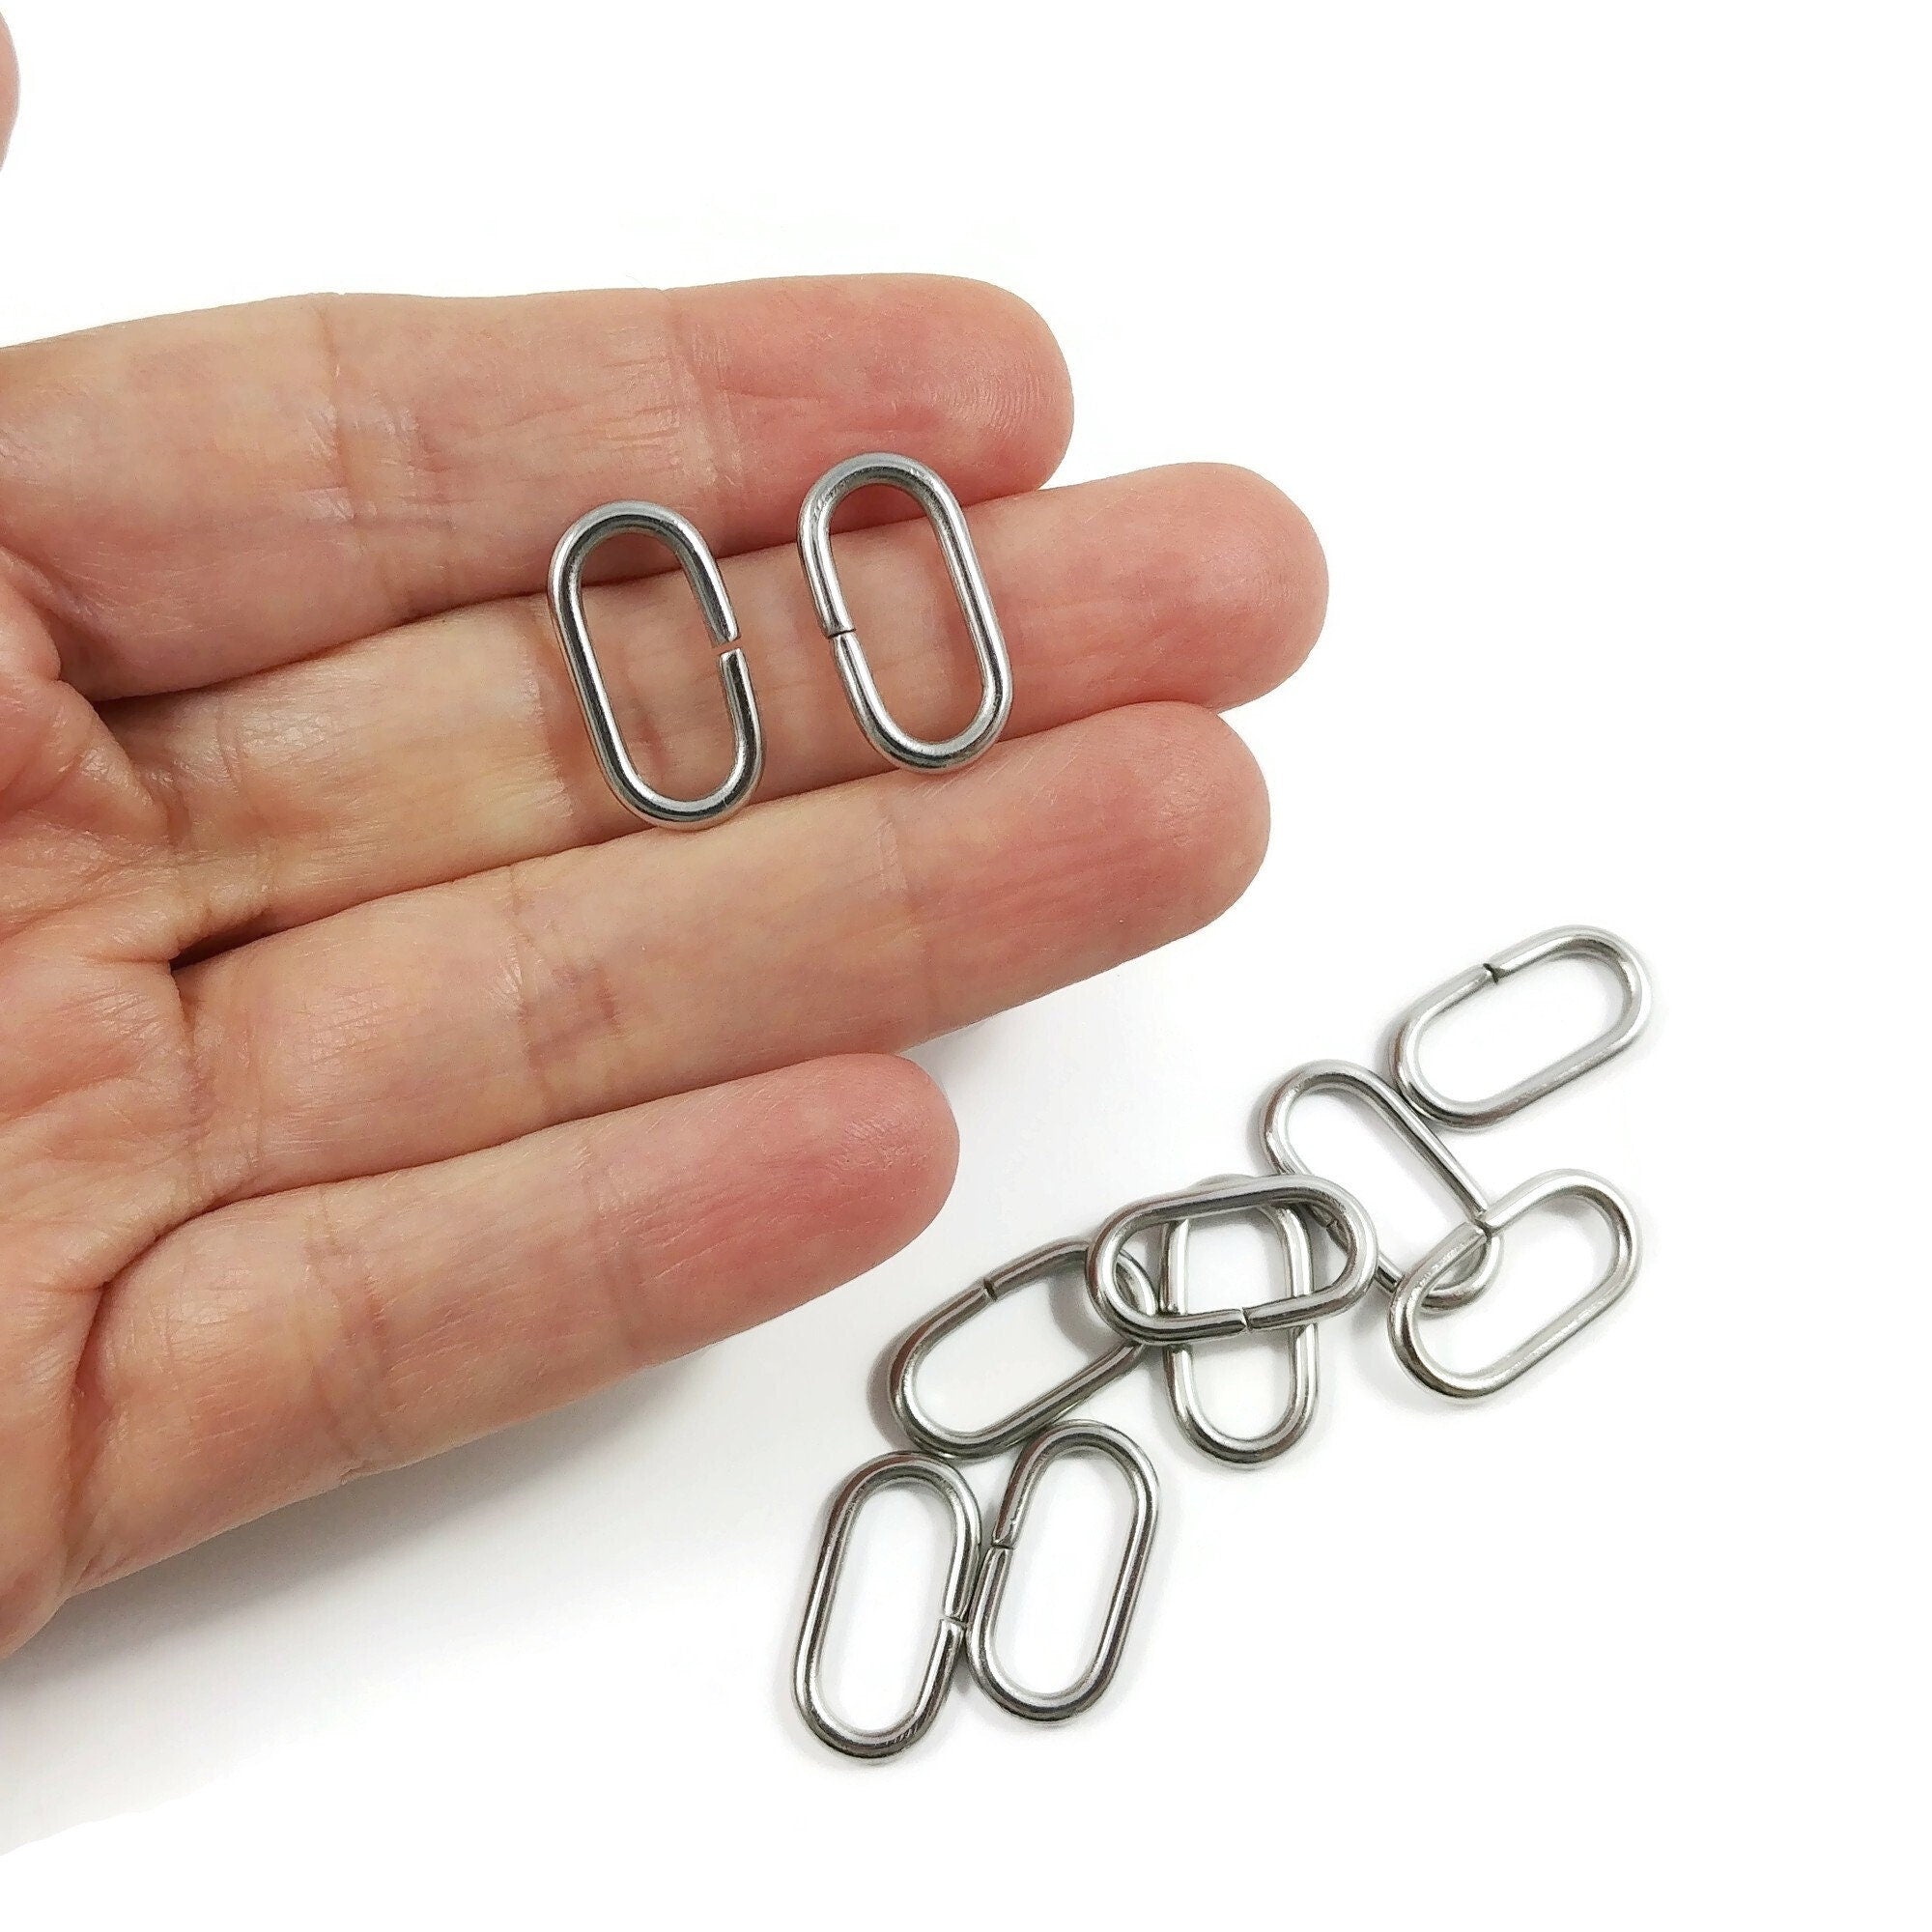 100 Pieces - 304 Stainless Steel Jump Rings - 20mm - 12 Gauge (2mm  Thickness) 